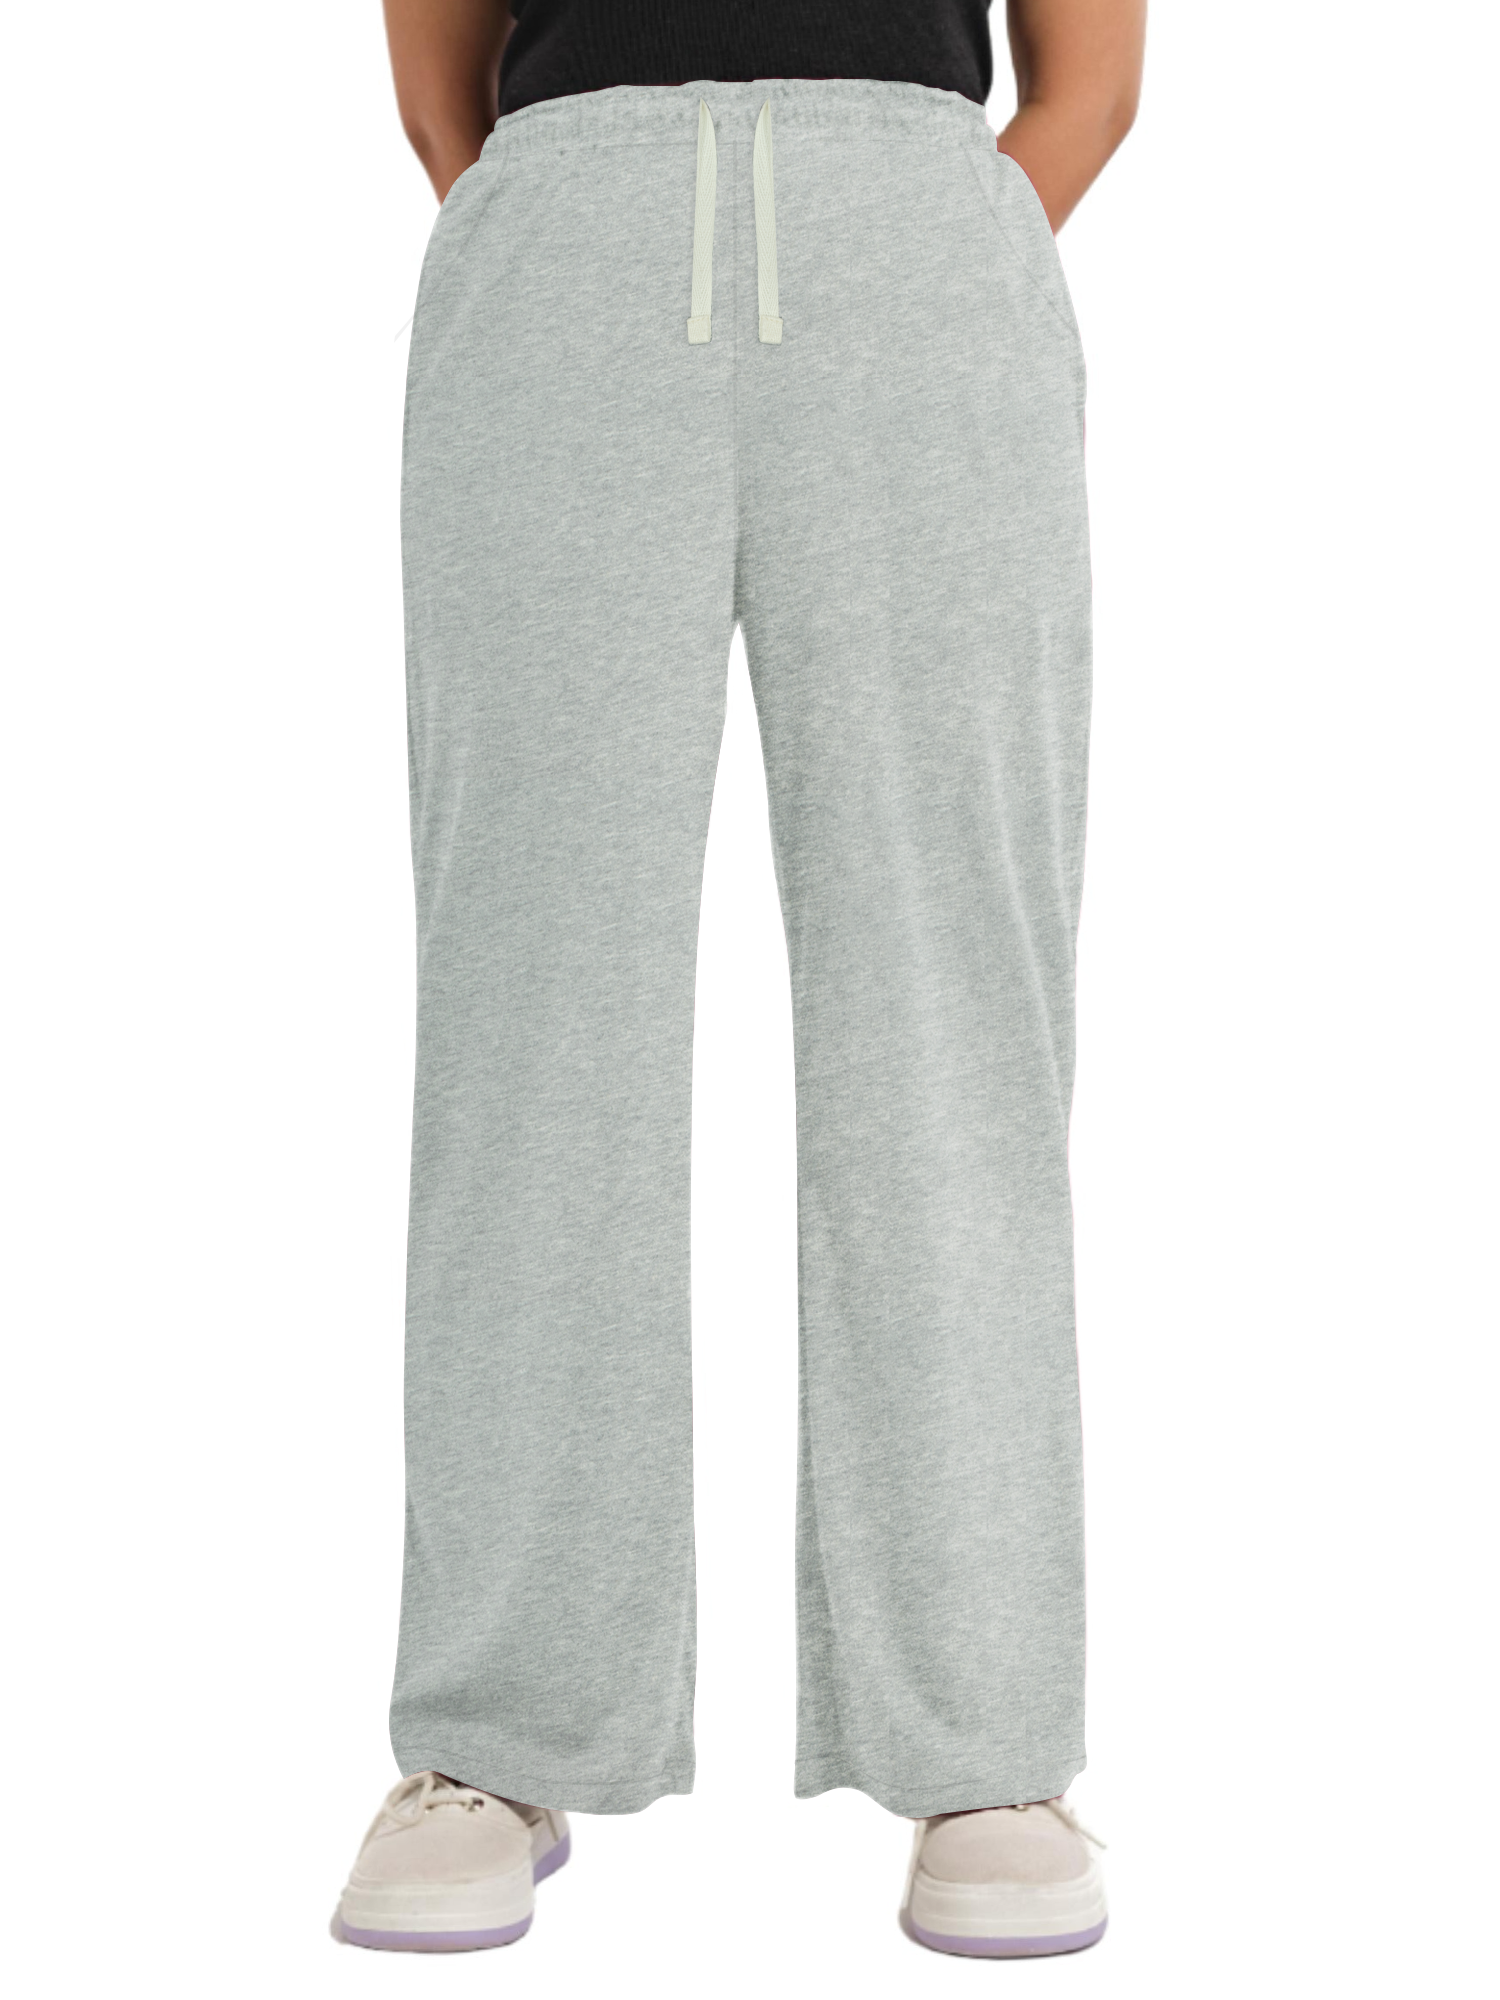 WOMEN'S GREY RELAX FIT JOGGER